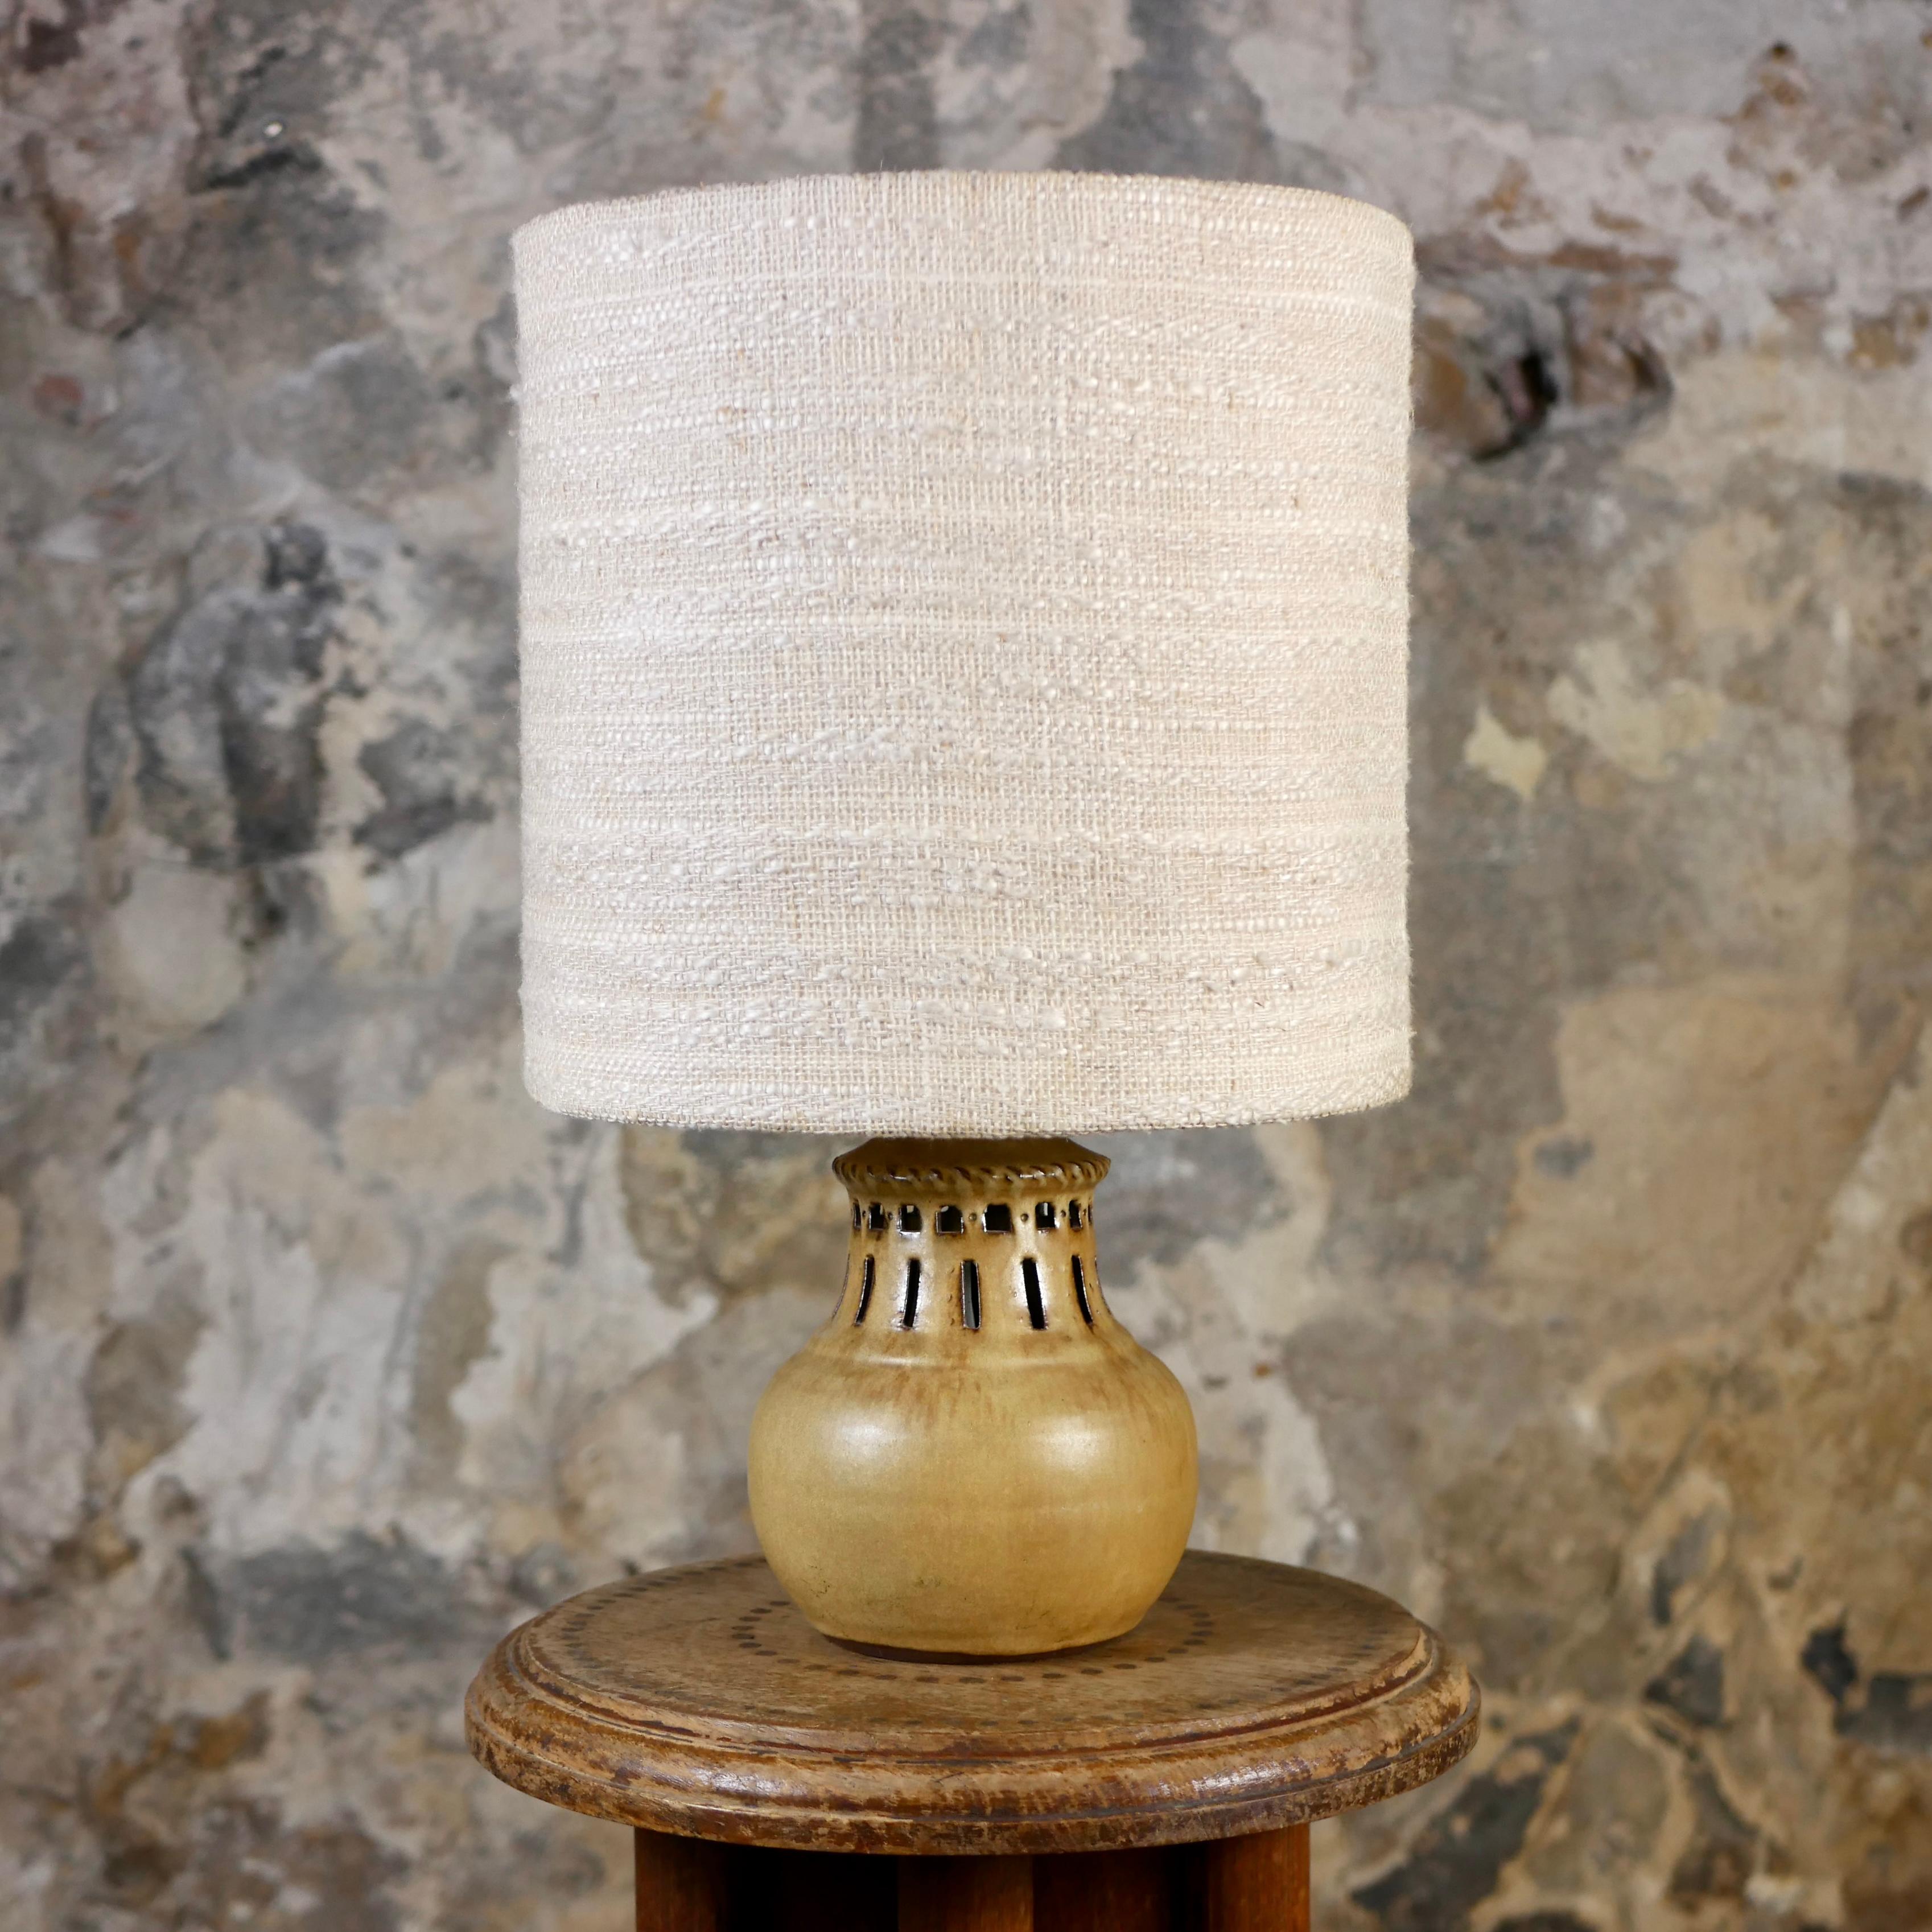 Beautiful sandstone table lamp by Thierry and Chantal Robert, from their atelier 